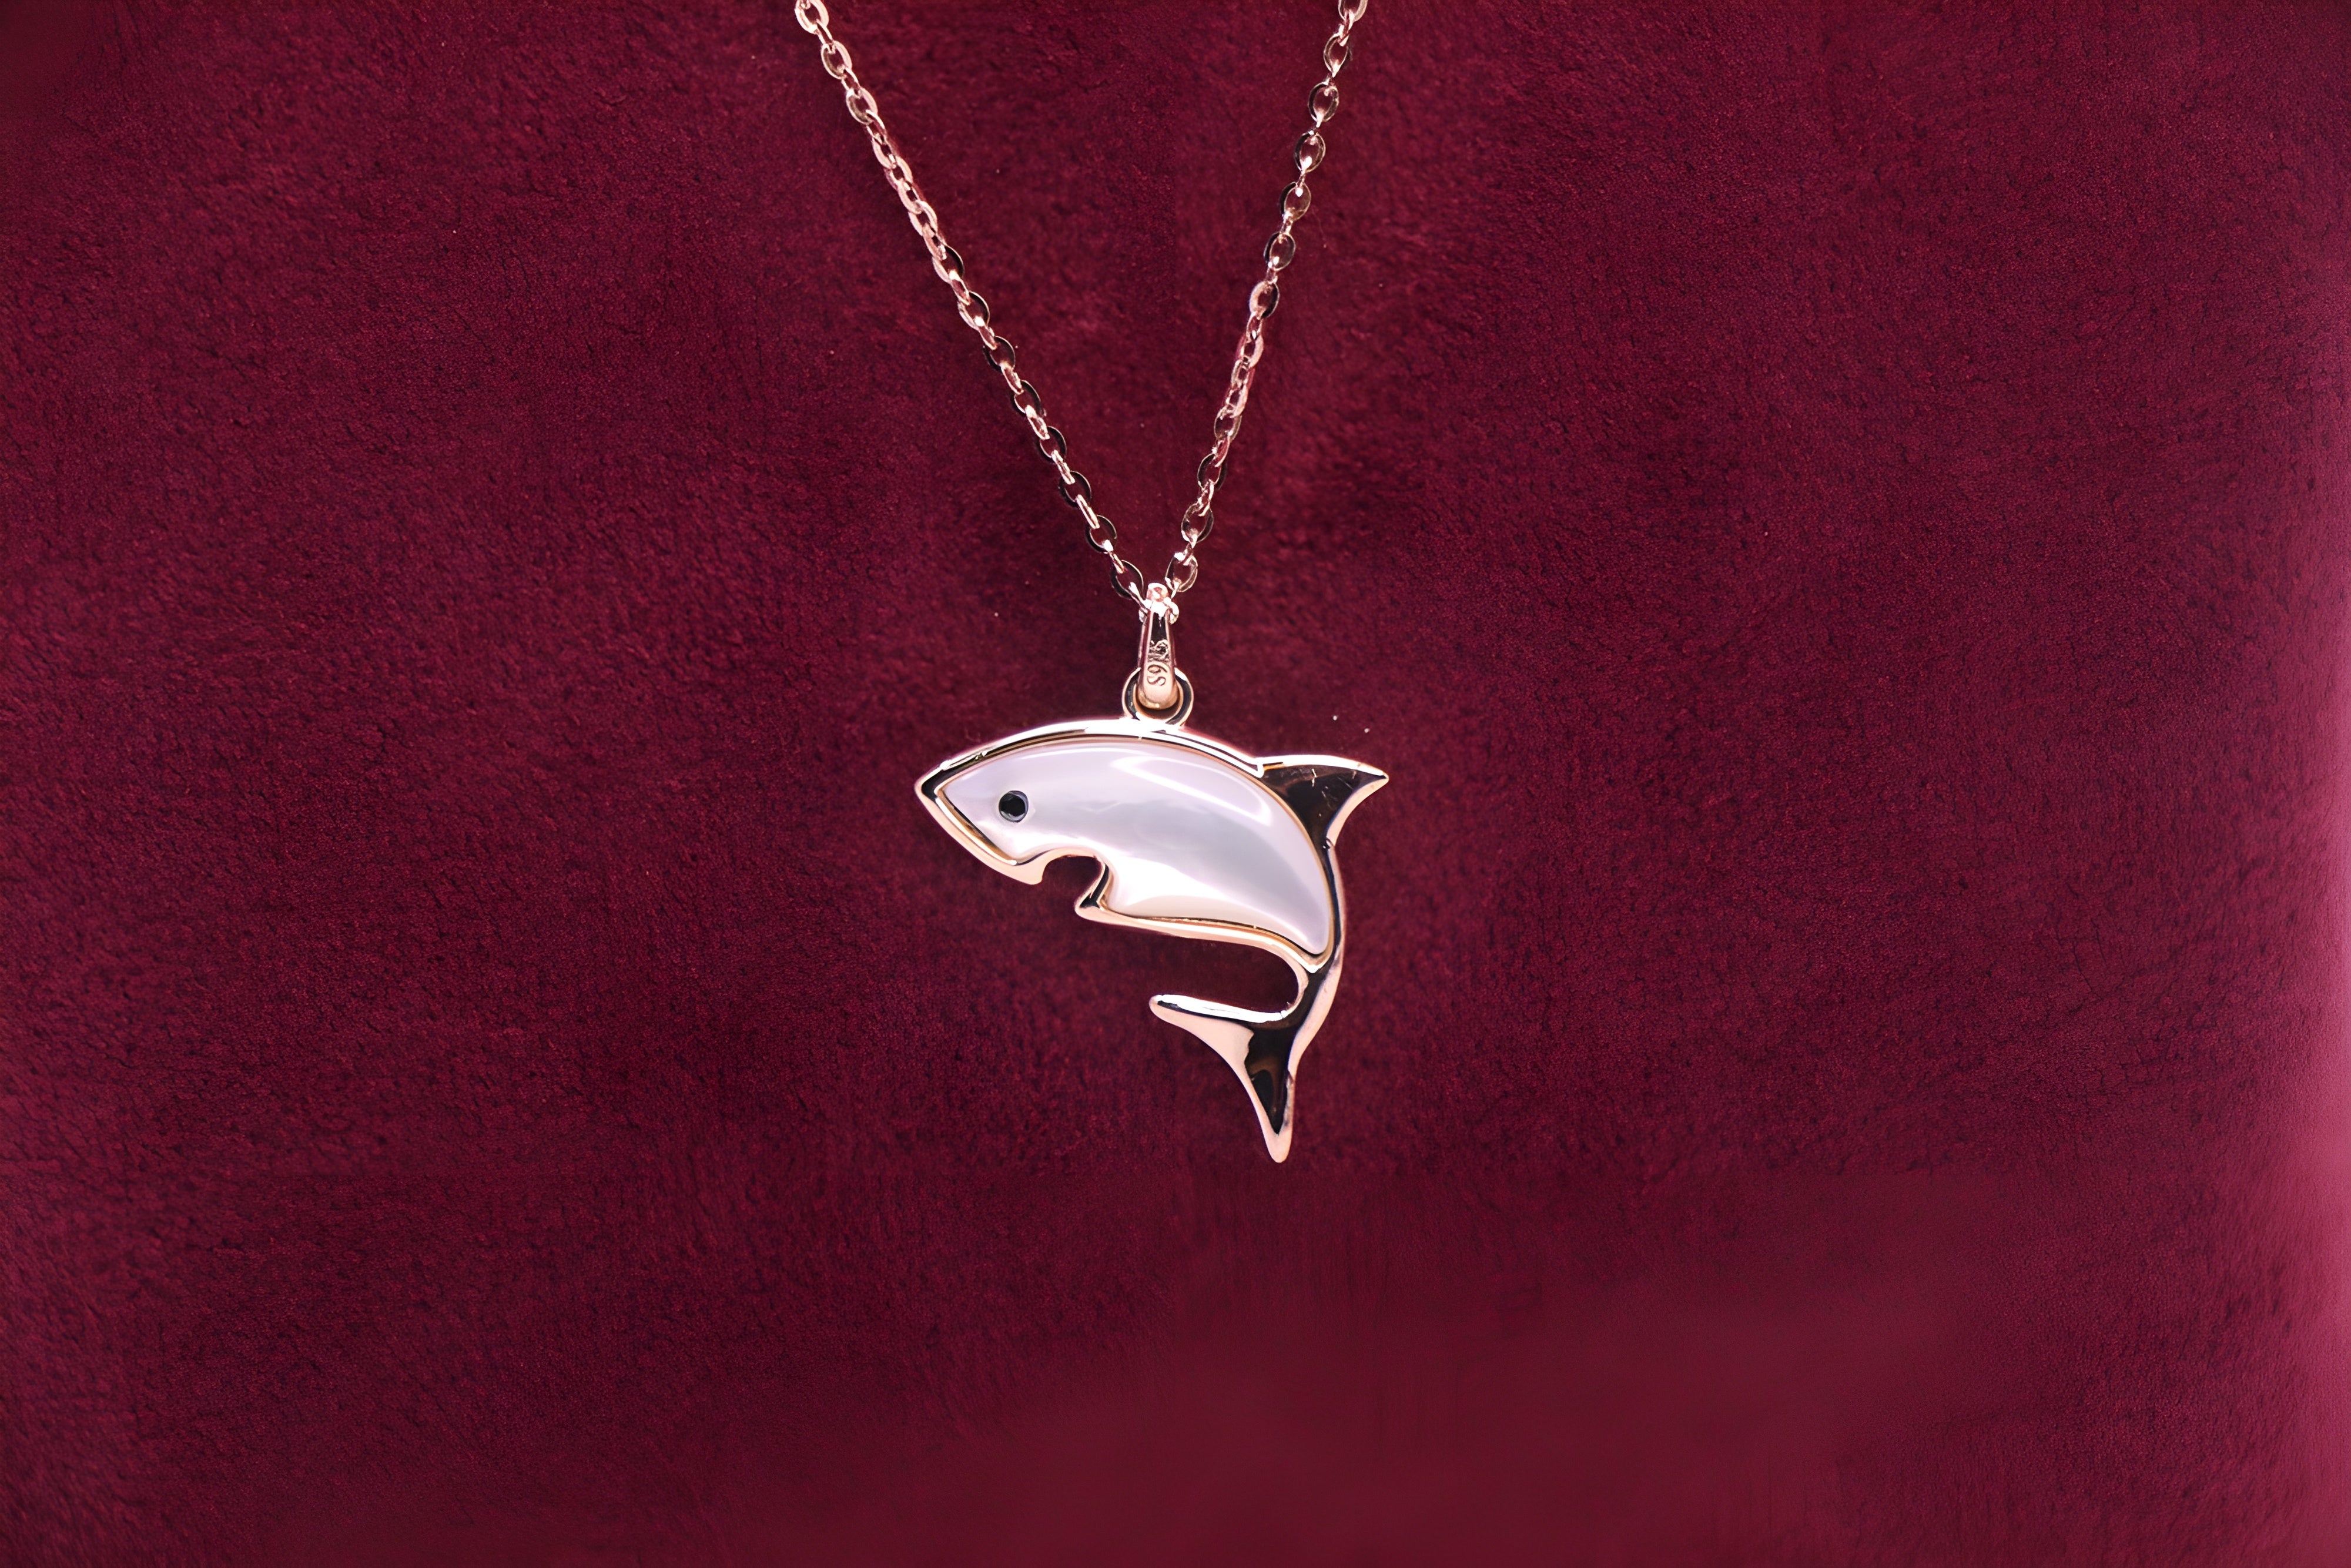 Gleaming Shark Sterling Silver Pendant with Swarovski Crystals